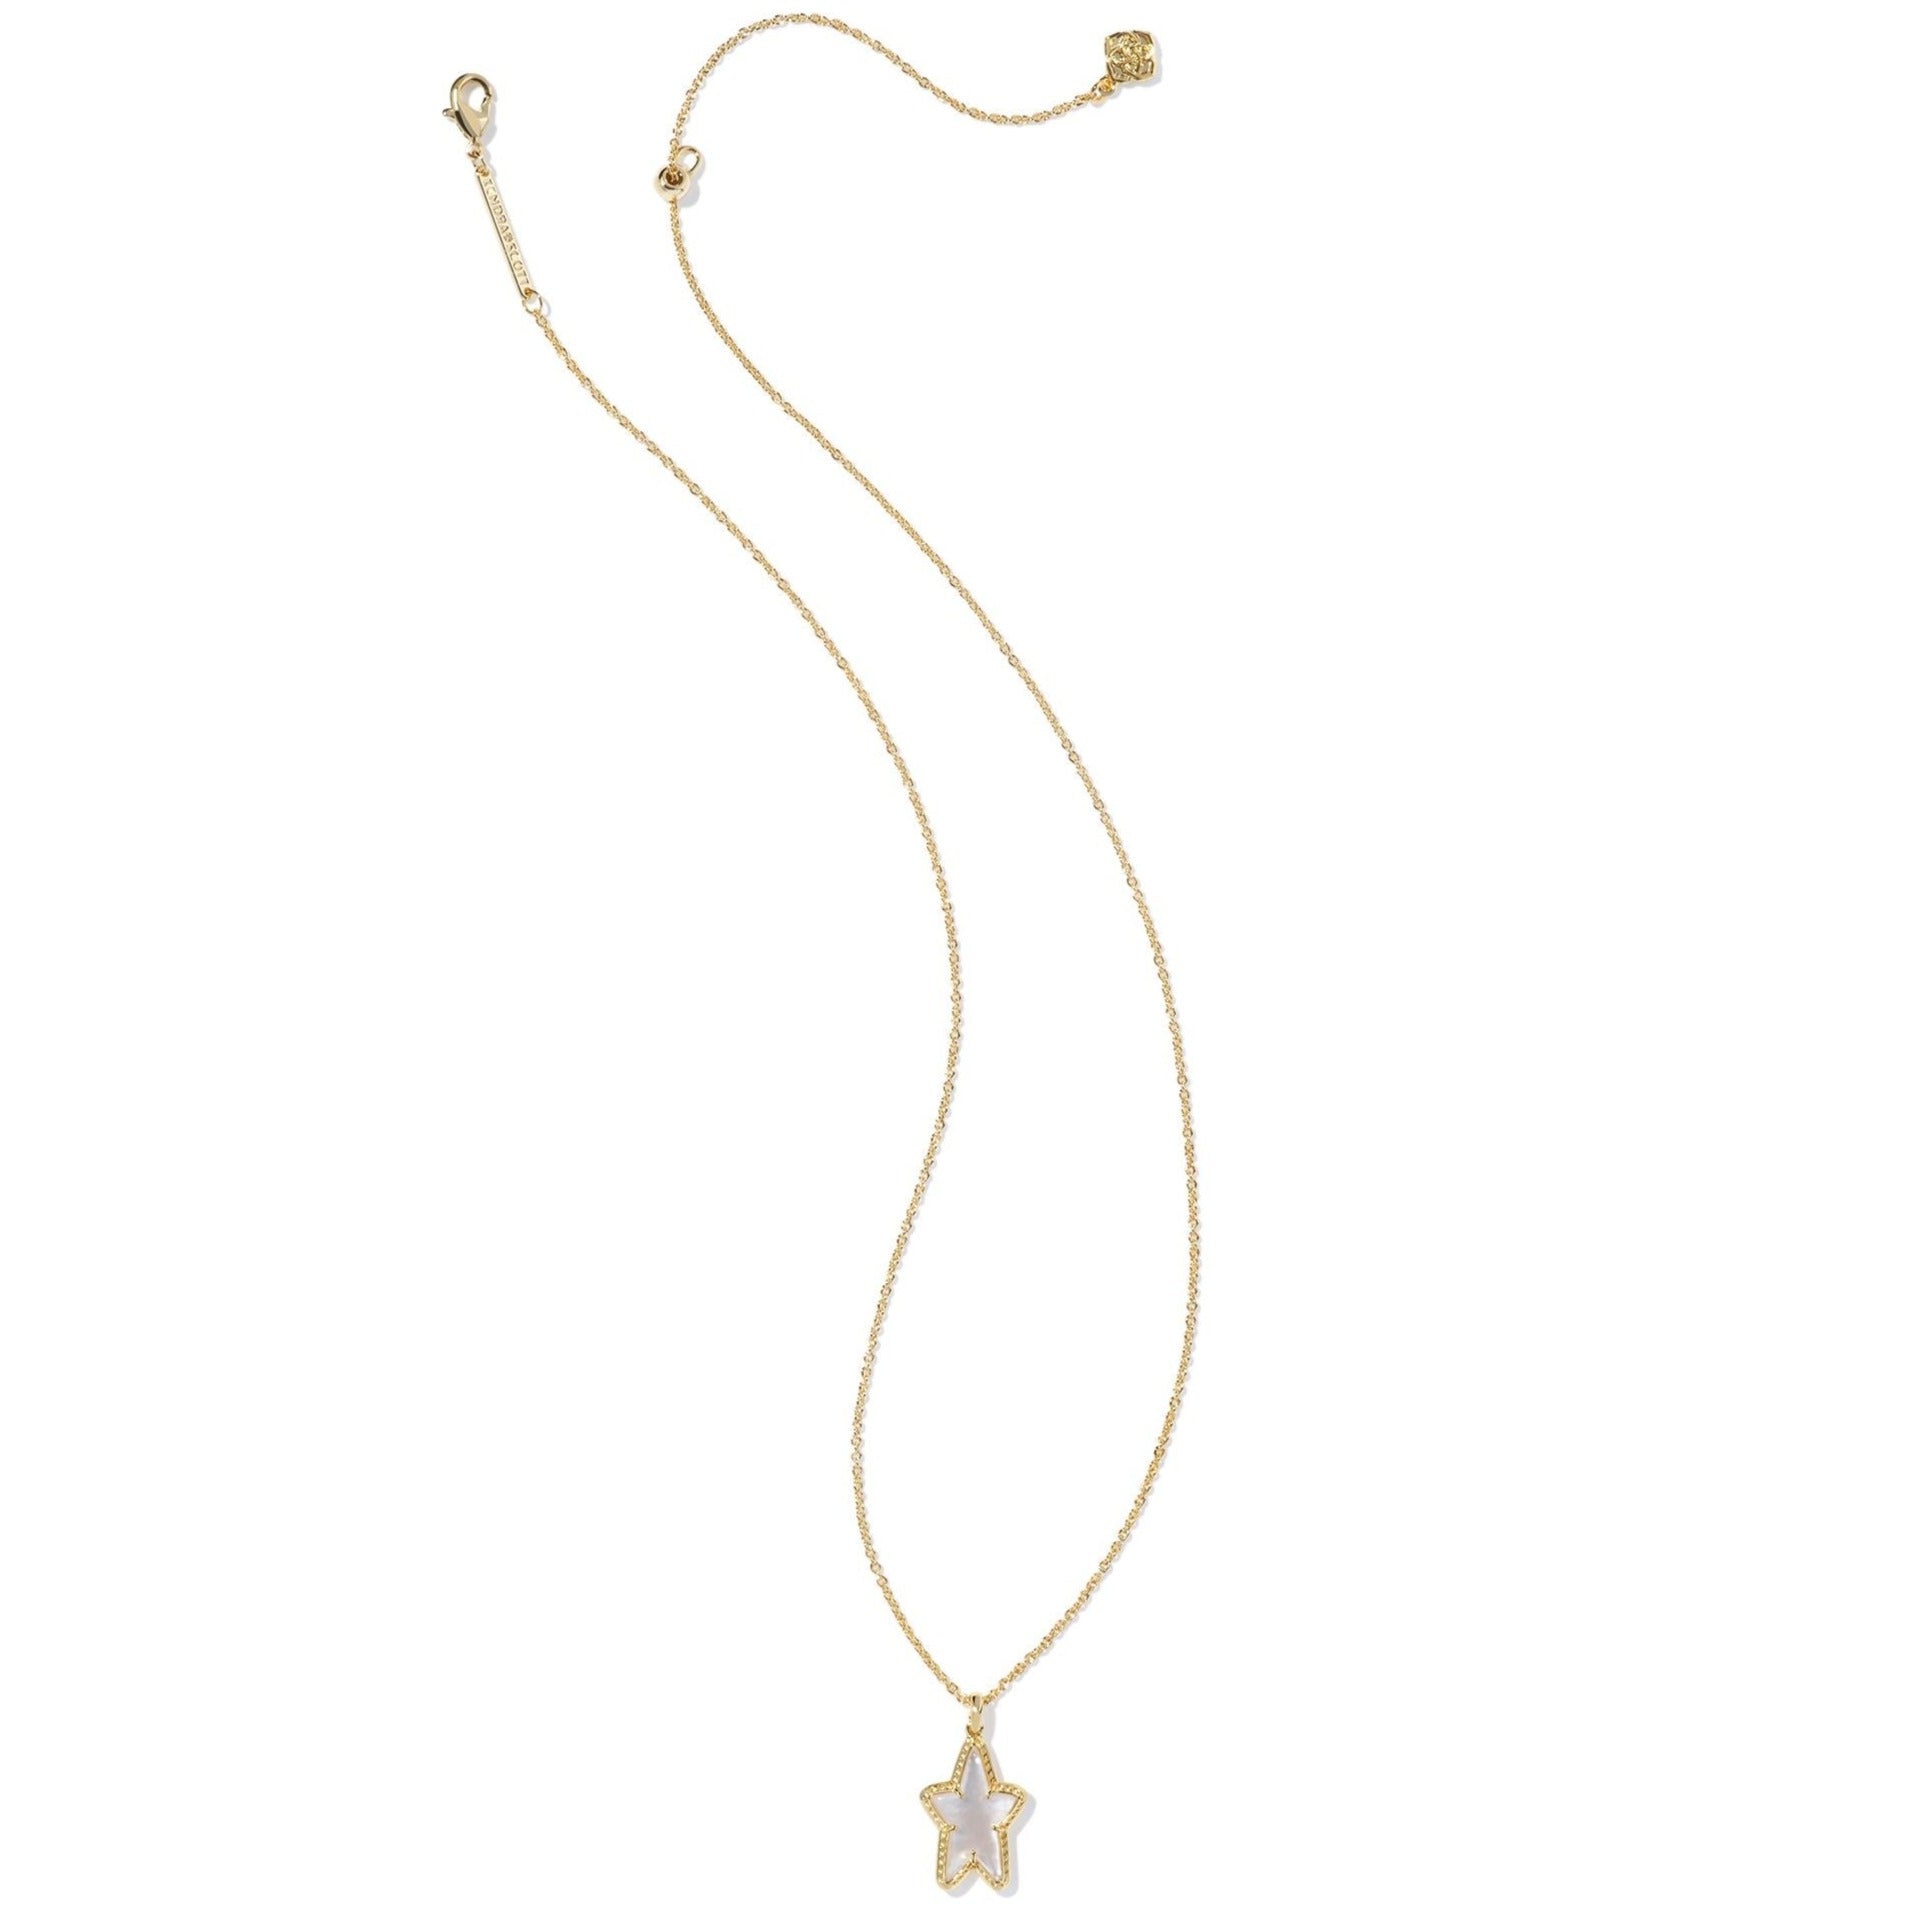 Kendra Scott | Ada Gold Star Short Pendant Necklace in Ivory Mother of Pearl - Giddy Up Glamour Boutique